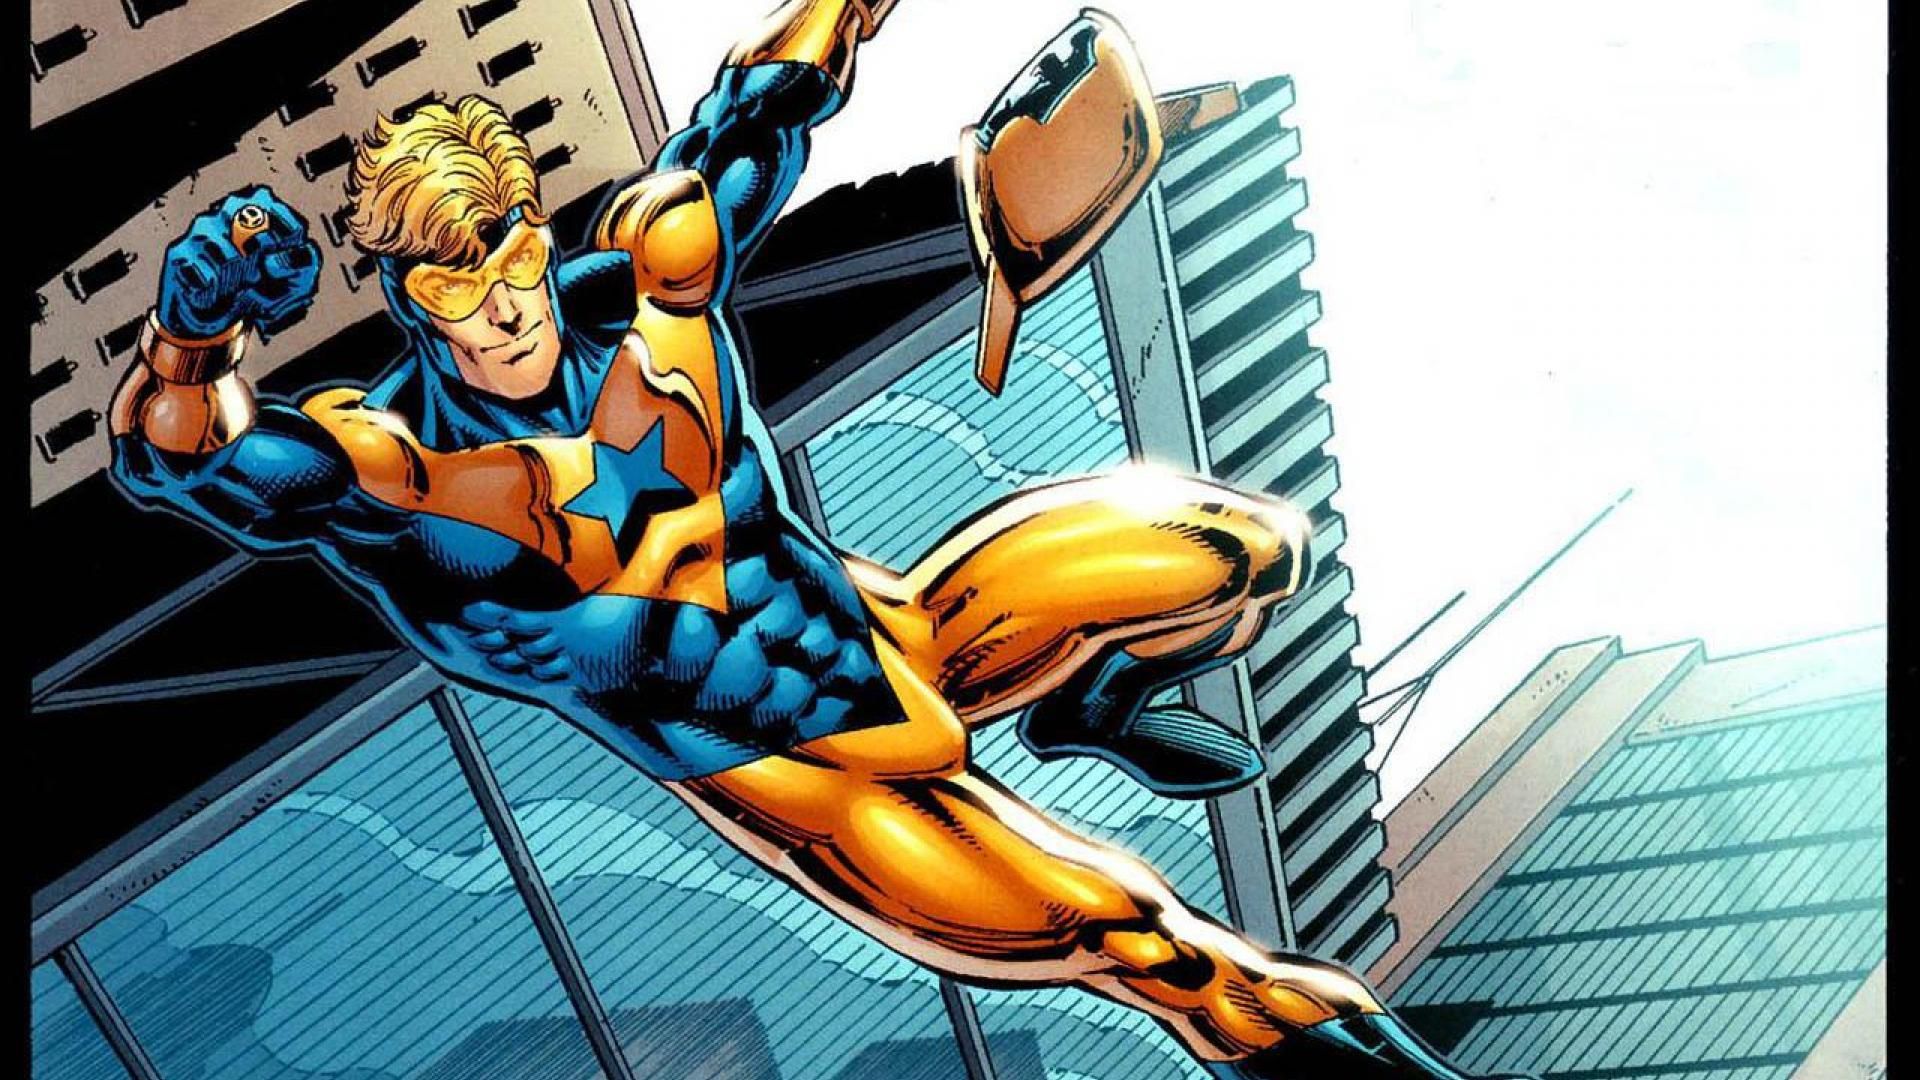 Superheroes Who Never Settled: Booster Gold